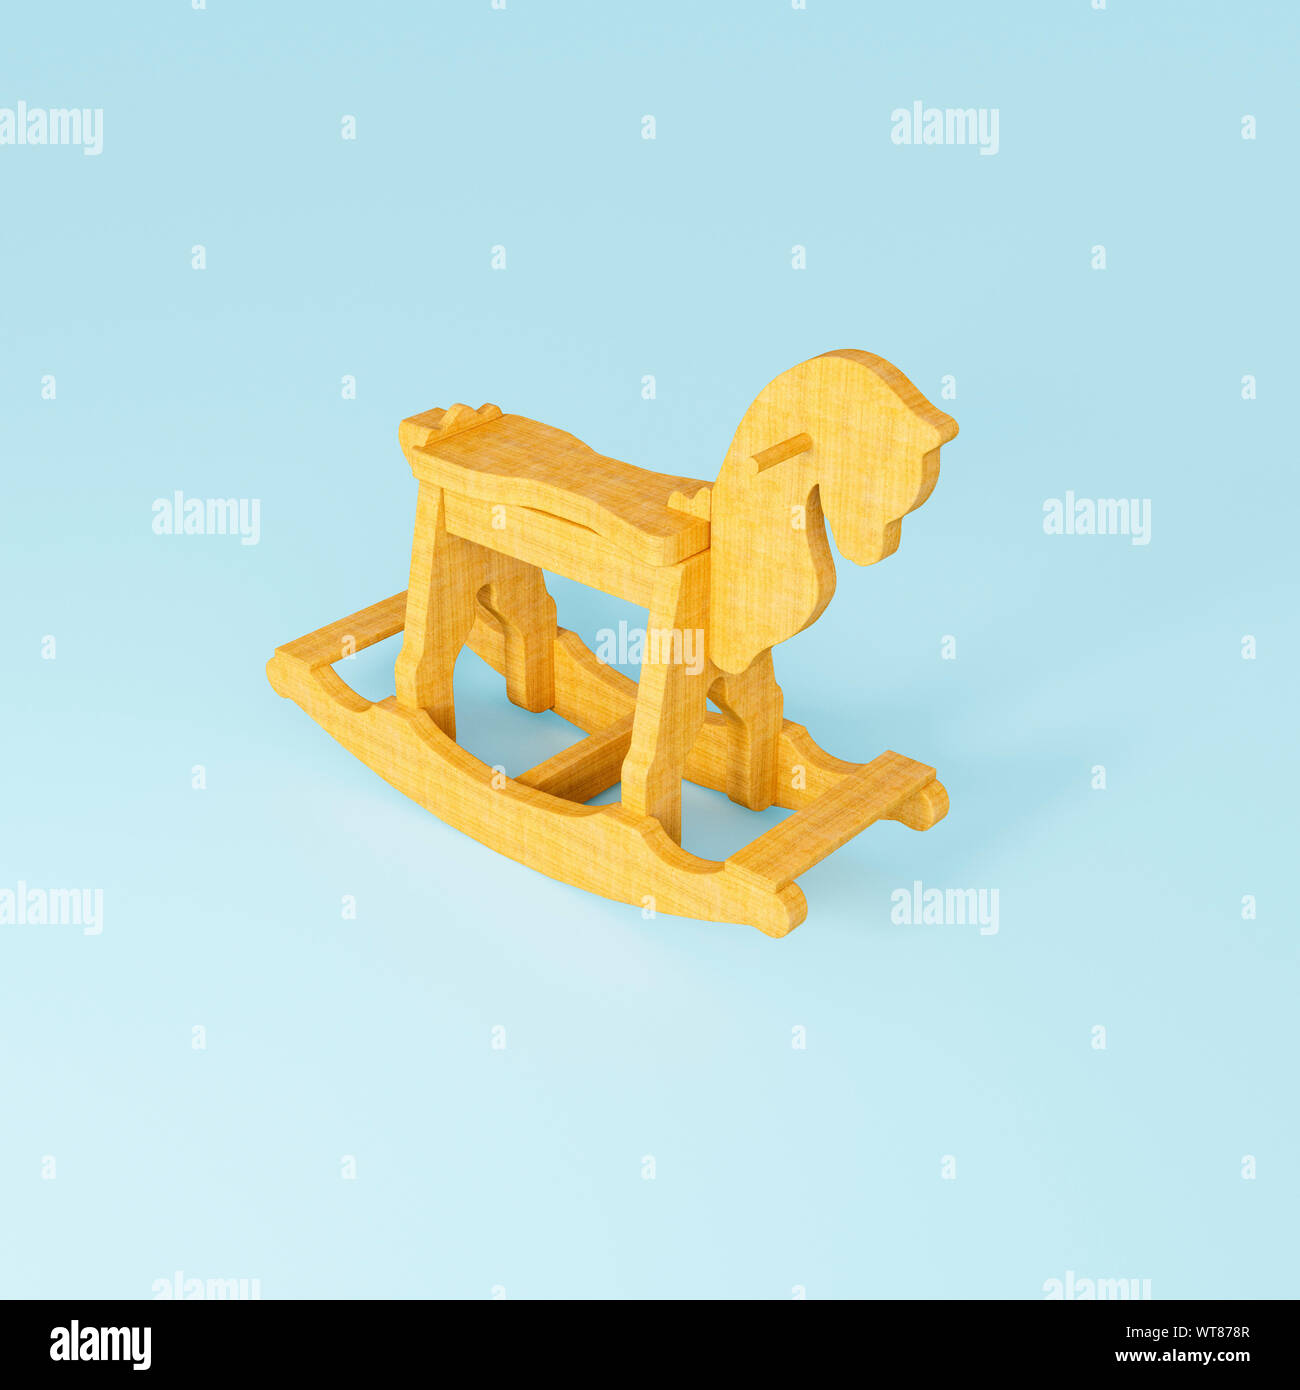 Childrens wooden toys, a wooden rocking horse toy Stock Photo